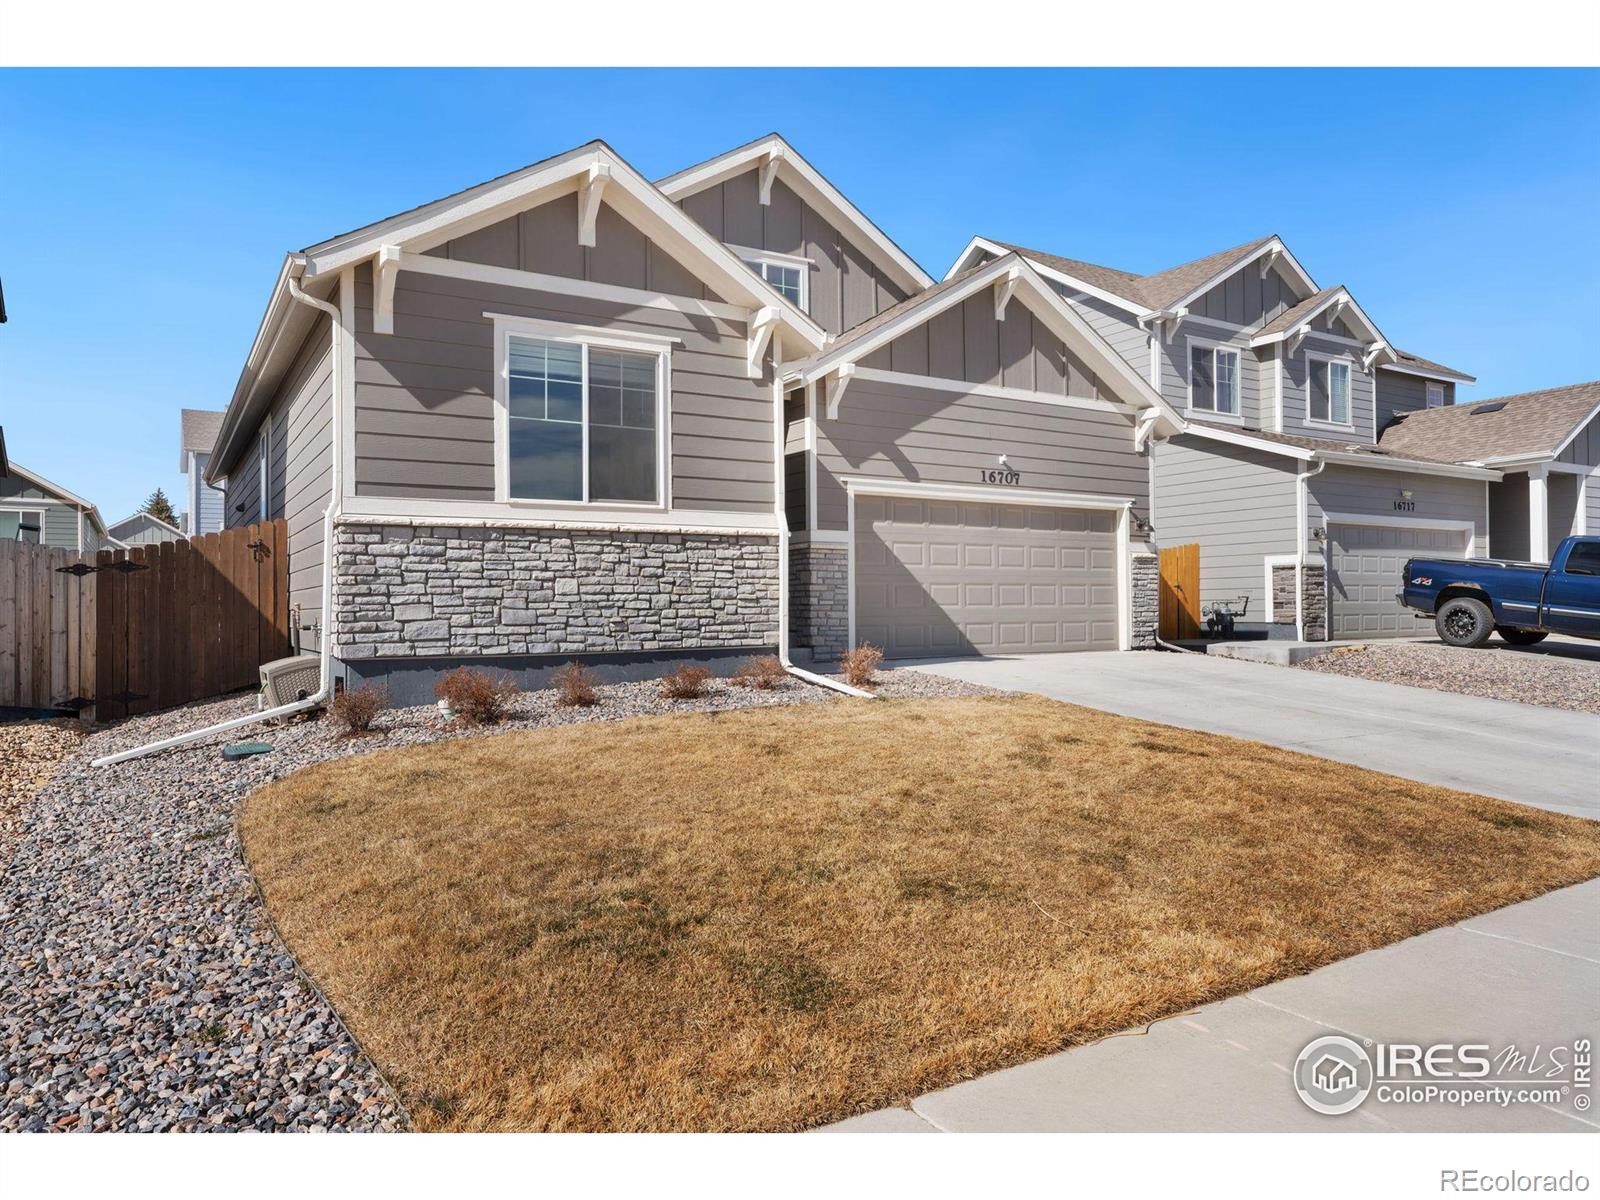 Report Image for 16707  Lake Helen Boulevard,Mead, Colorado